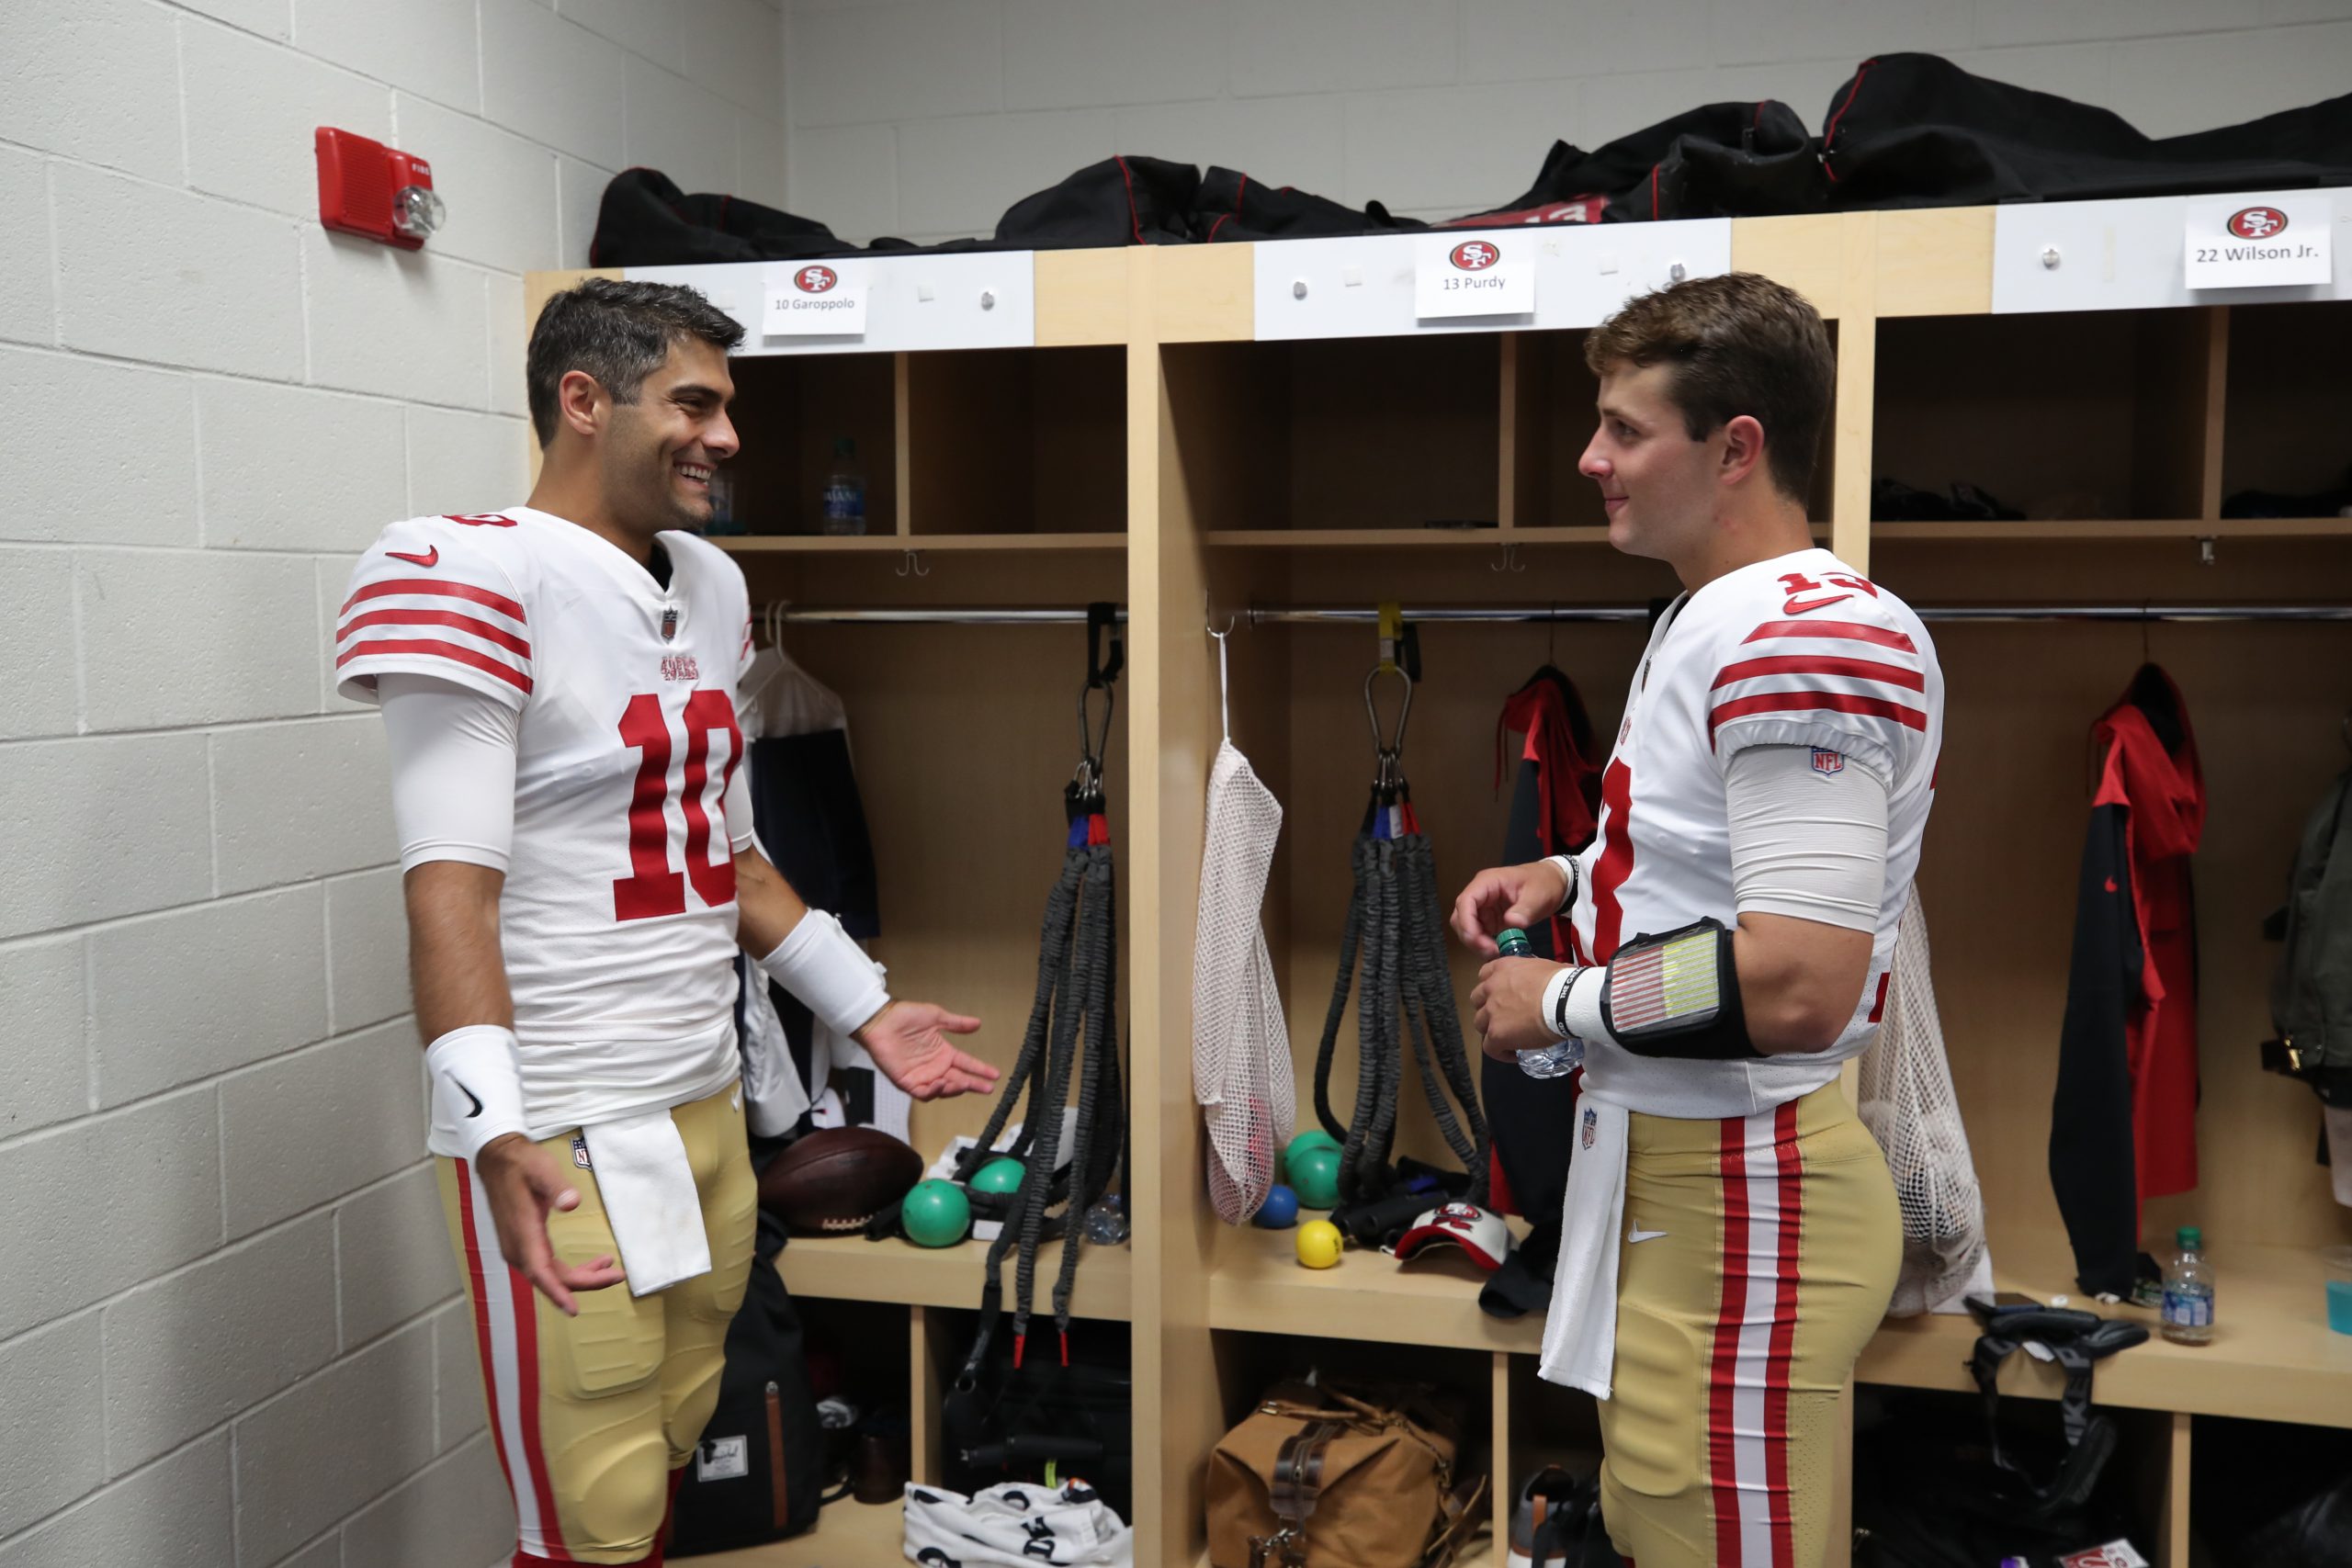 Jimmy Garoppolo #10 and Brock Purdy #13 of the San Francisco 49ers in the locker room before the ga...